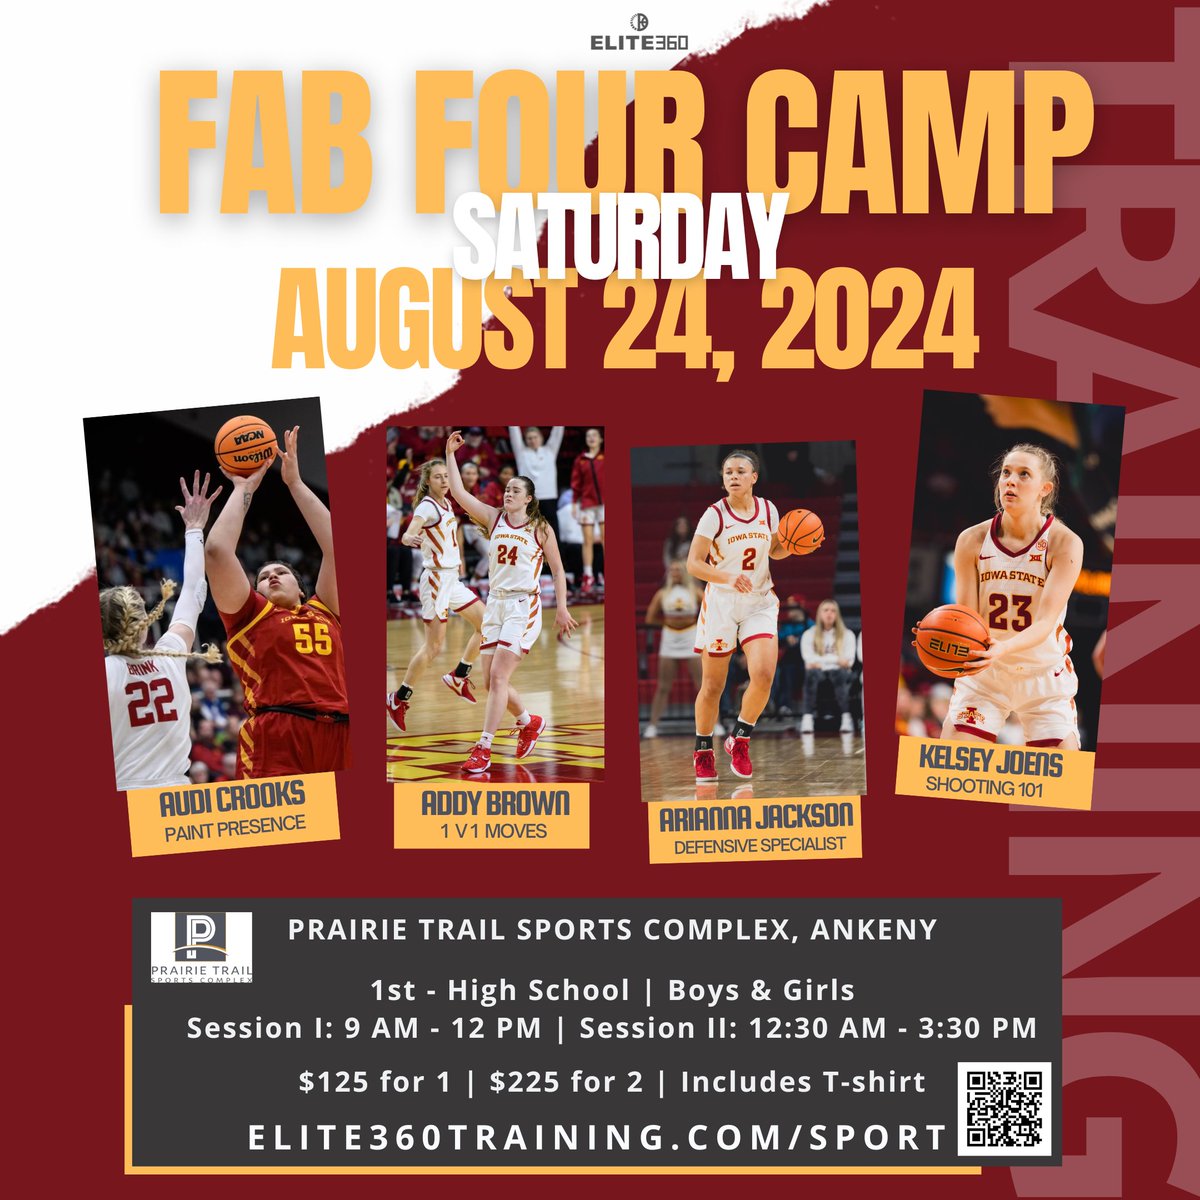 What do you get when you combine one of the nation's best post players, a defensive specialist, a versatile 1 v 1 player, & an elite shooter? FAB FOUR CAMP! 🏀 Join these 4 on Aug 24 at @PrairieTrailSC Attend AM, PM, or both sessions! Register today! elite360training.com/sport